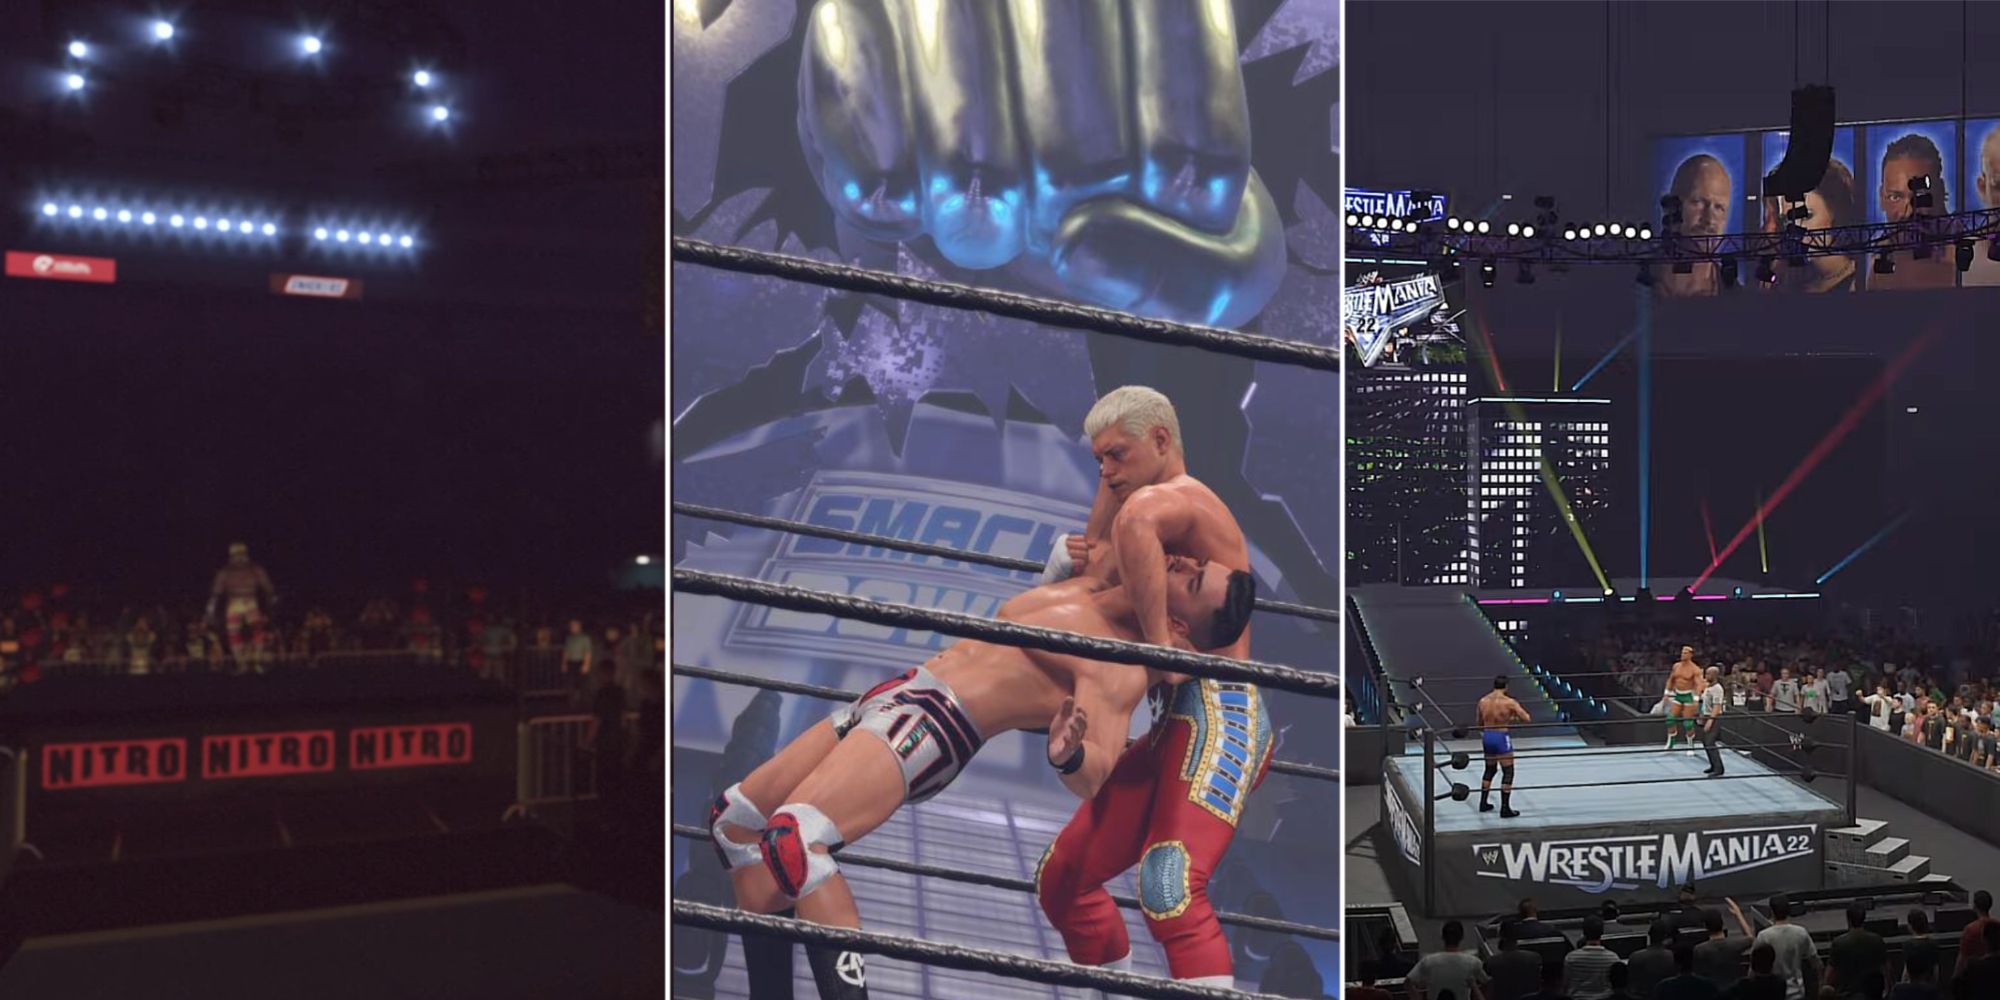 Hulk Hogan stands in the WCW Monday Nitro ring, Cody Rhodes goes for his finisher at SmackDown 2002, and two wrestlers stand across from each other in the ring of WrestleMania 22 in WWE 2K23.